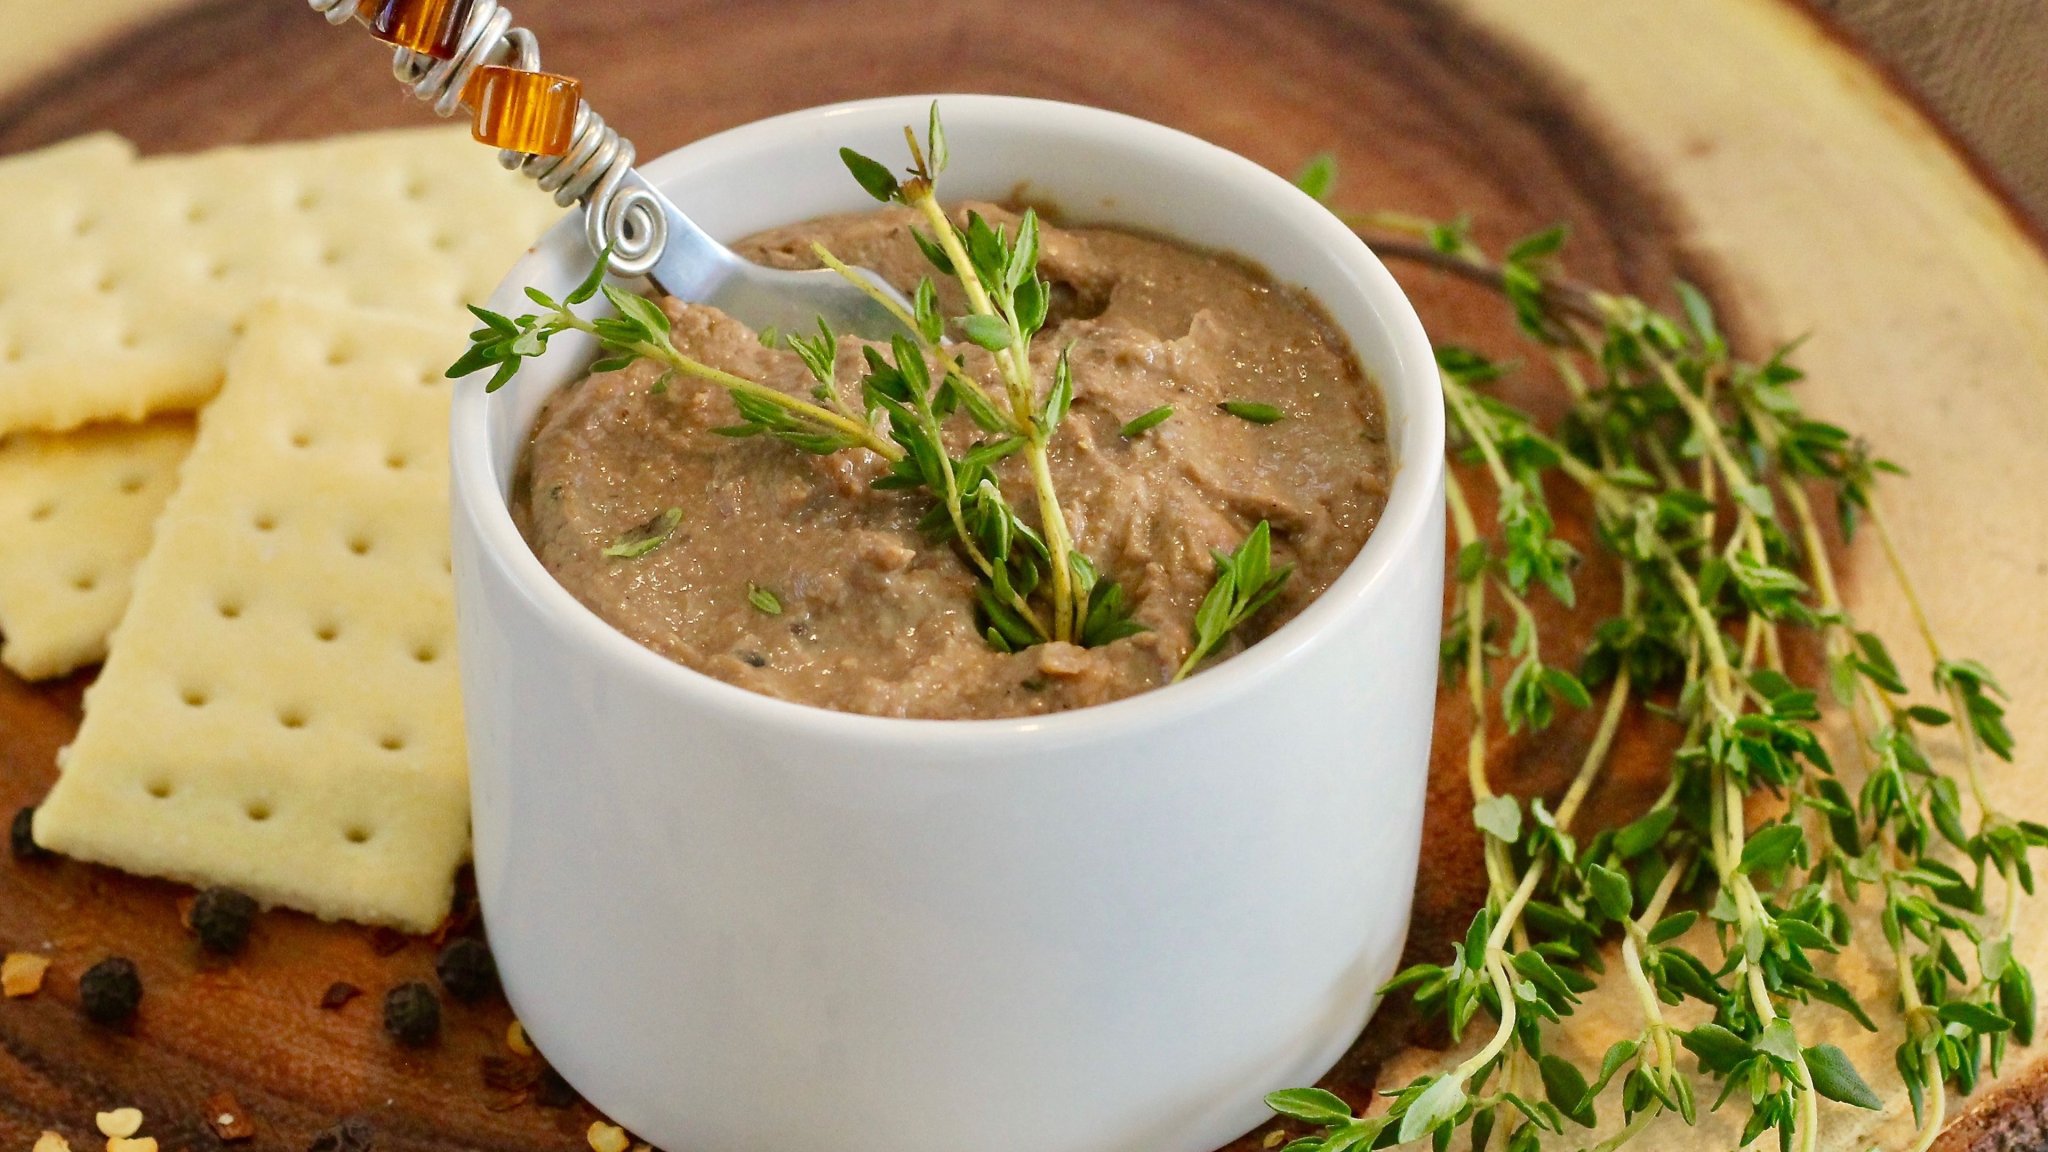 Colleen's Chicken Liver Pate